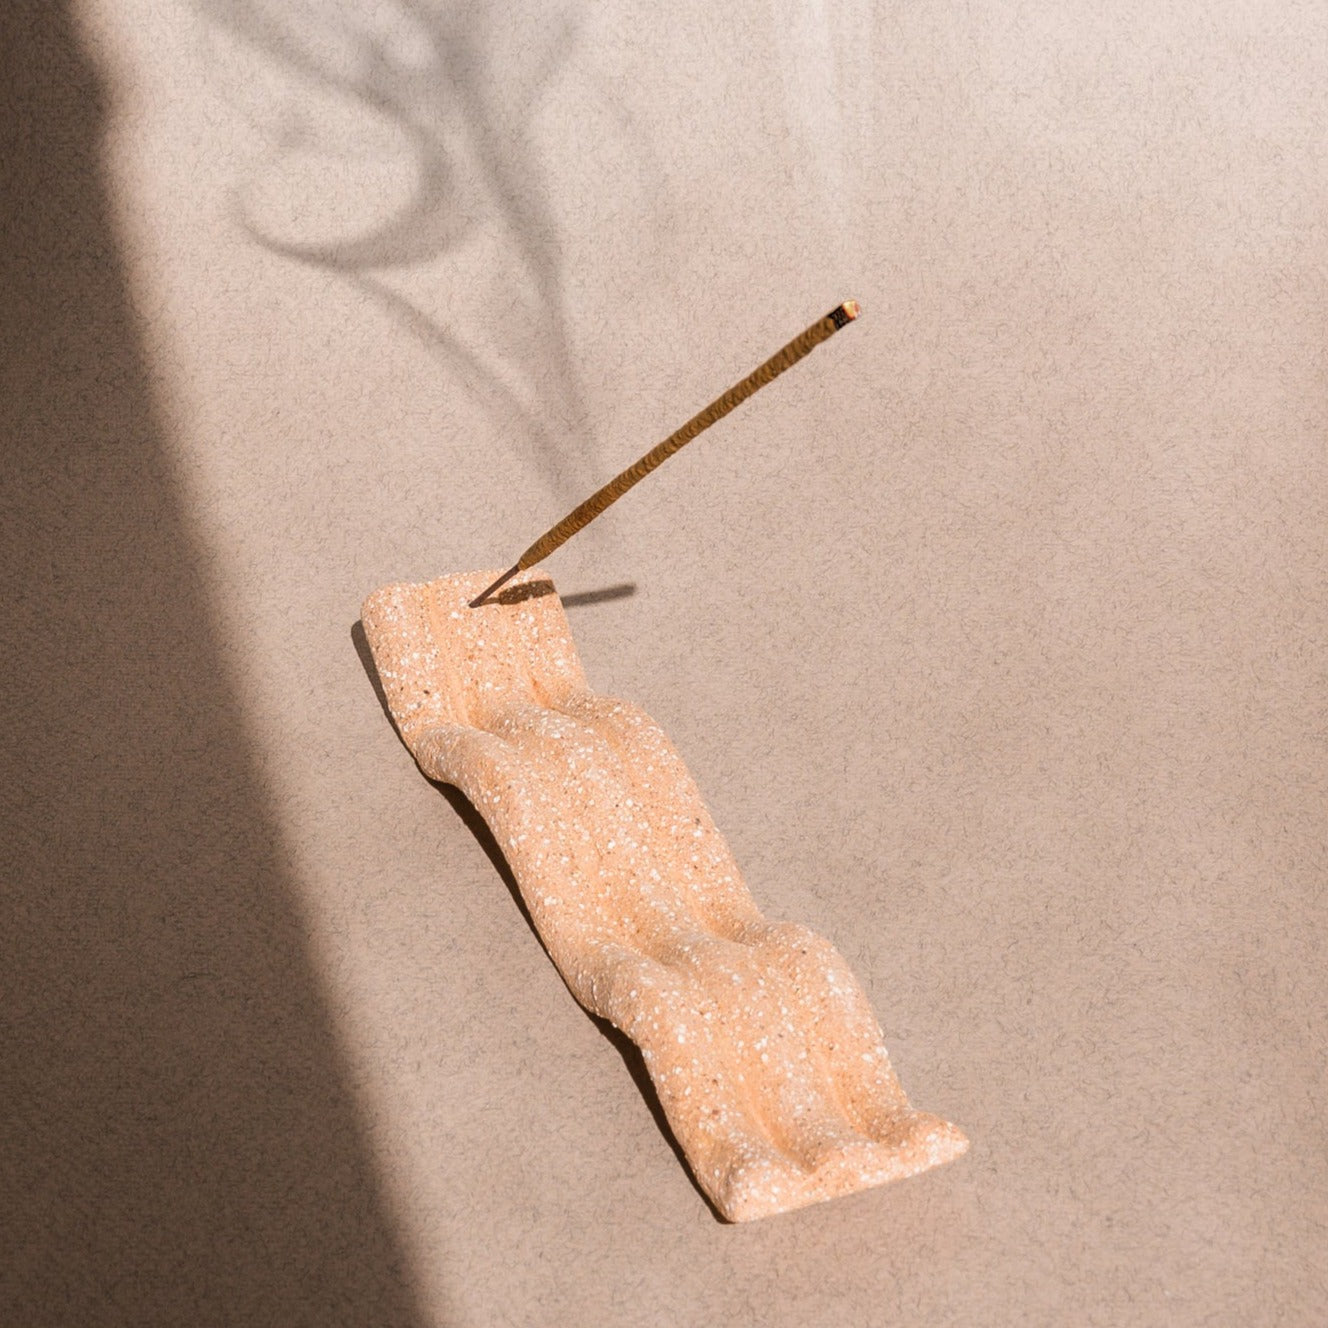 Elongated tray incense holder with imprinted wave pattern. The Wave of Senses symbolizes the undulating motion made by incense fragrance as it disperses throughout the room. The Wave holds the incense stick and catches ash as it falls.